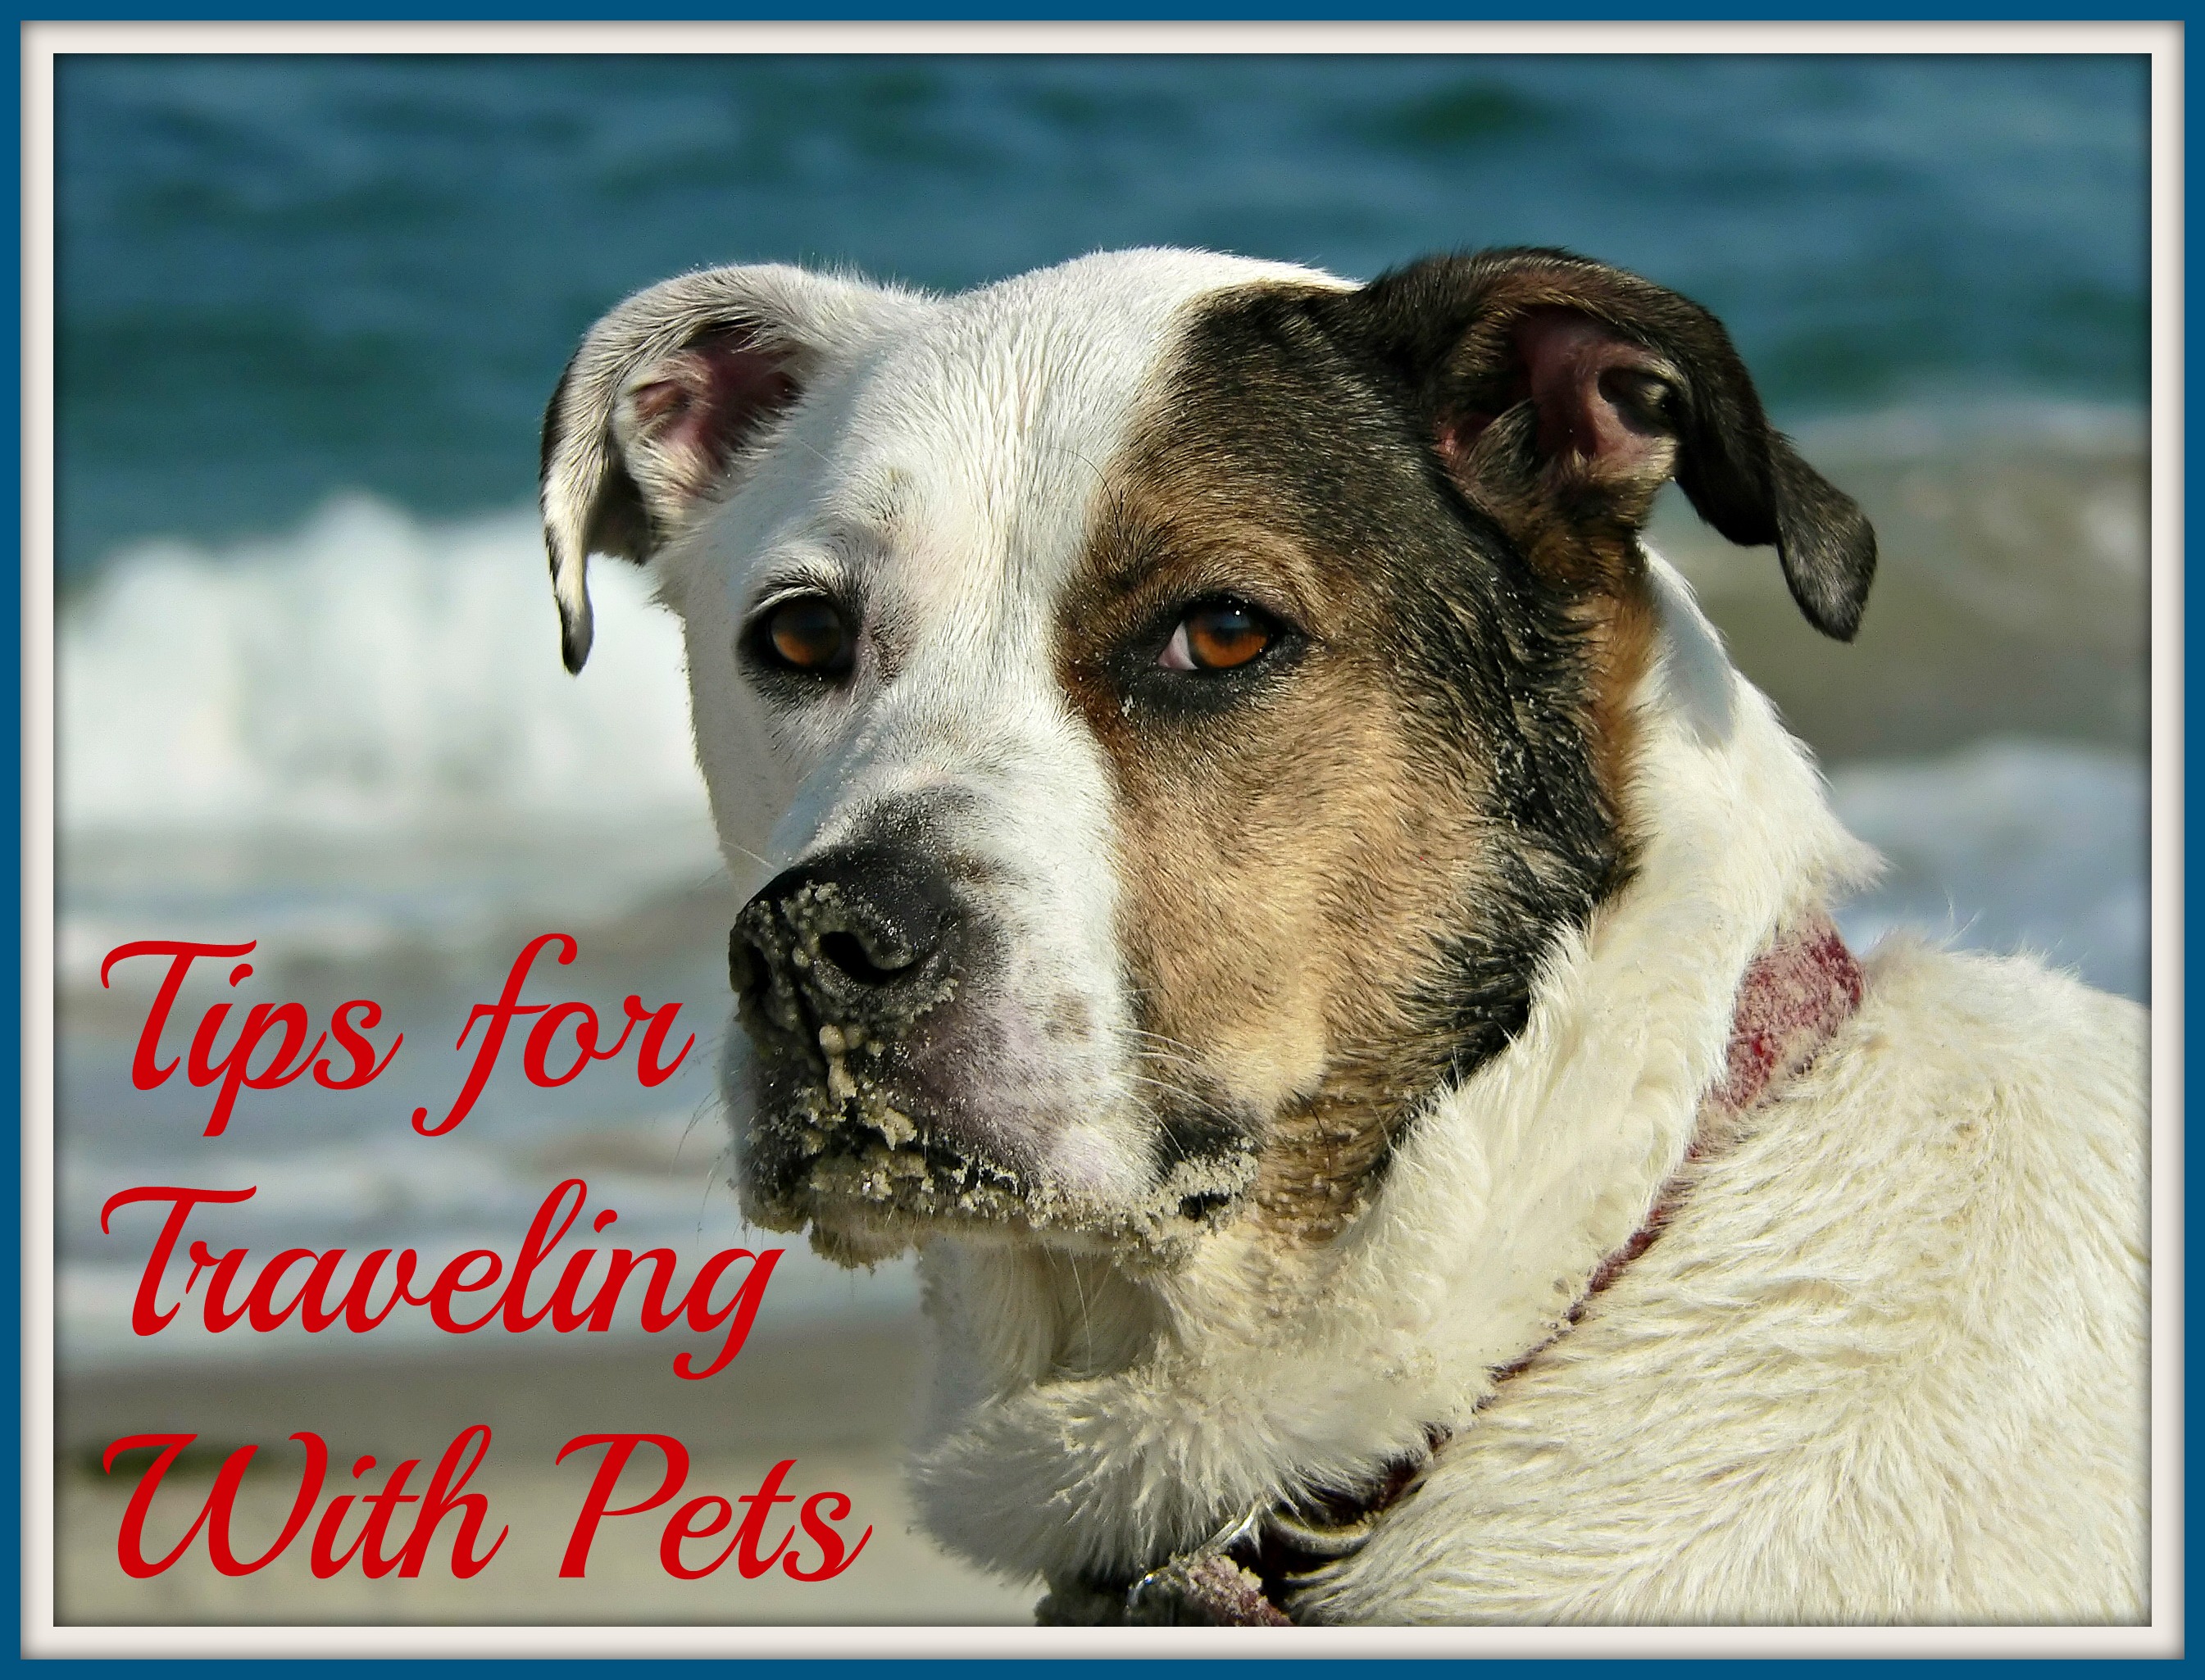 Tips for Traveling With Pets